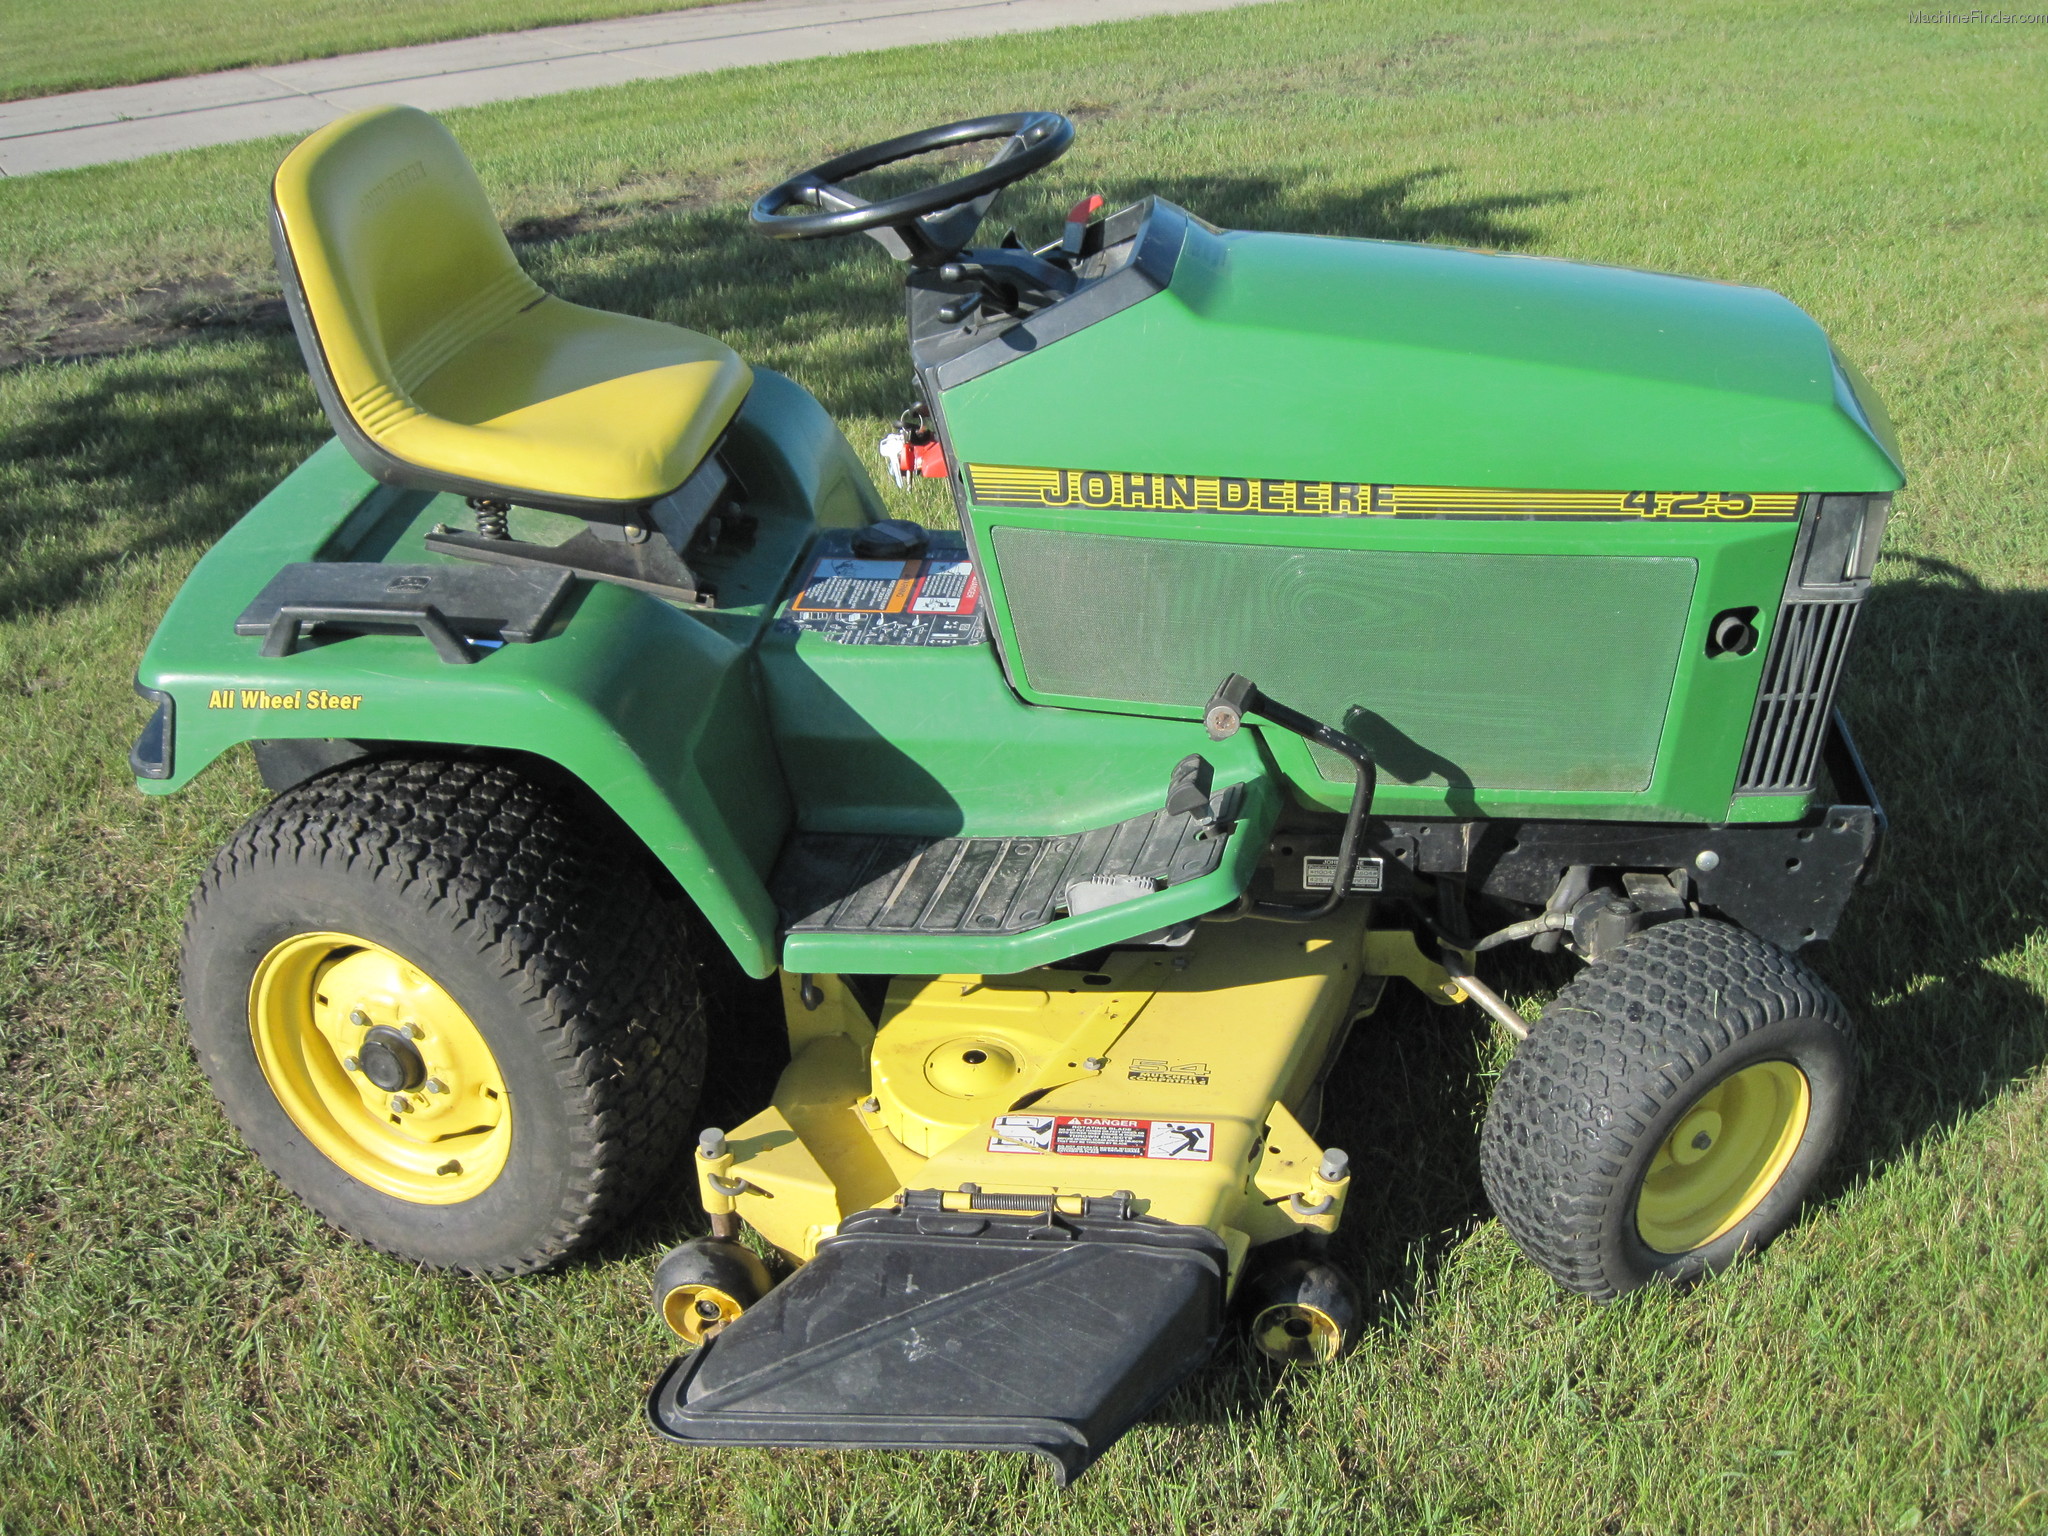 John Deere 425 aws 54 Lawn & Garden and Commercial Mowing ...